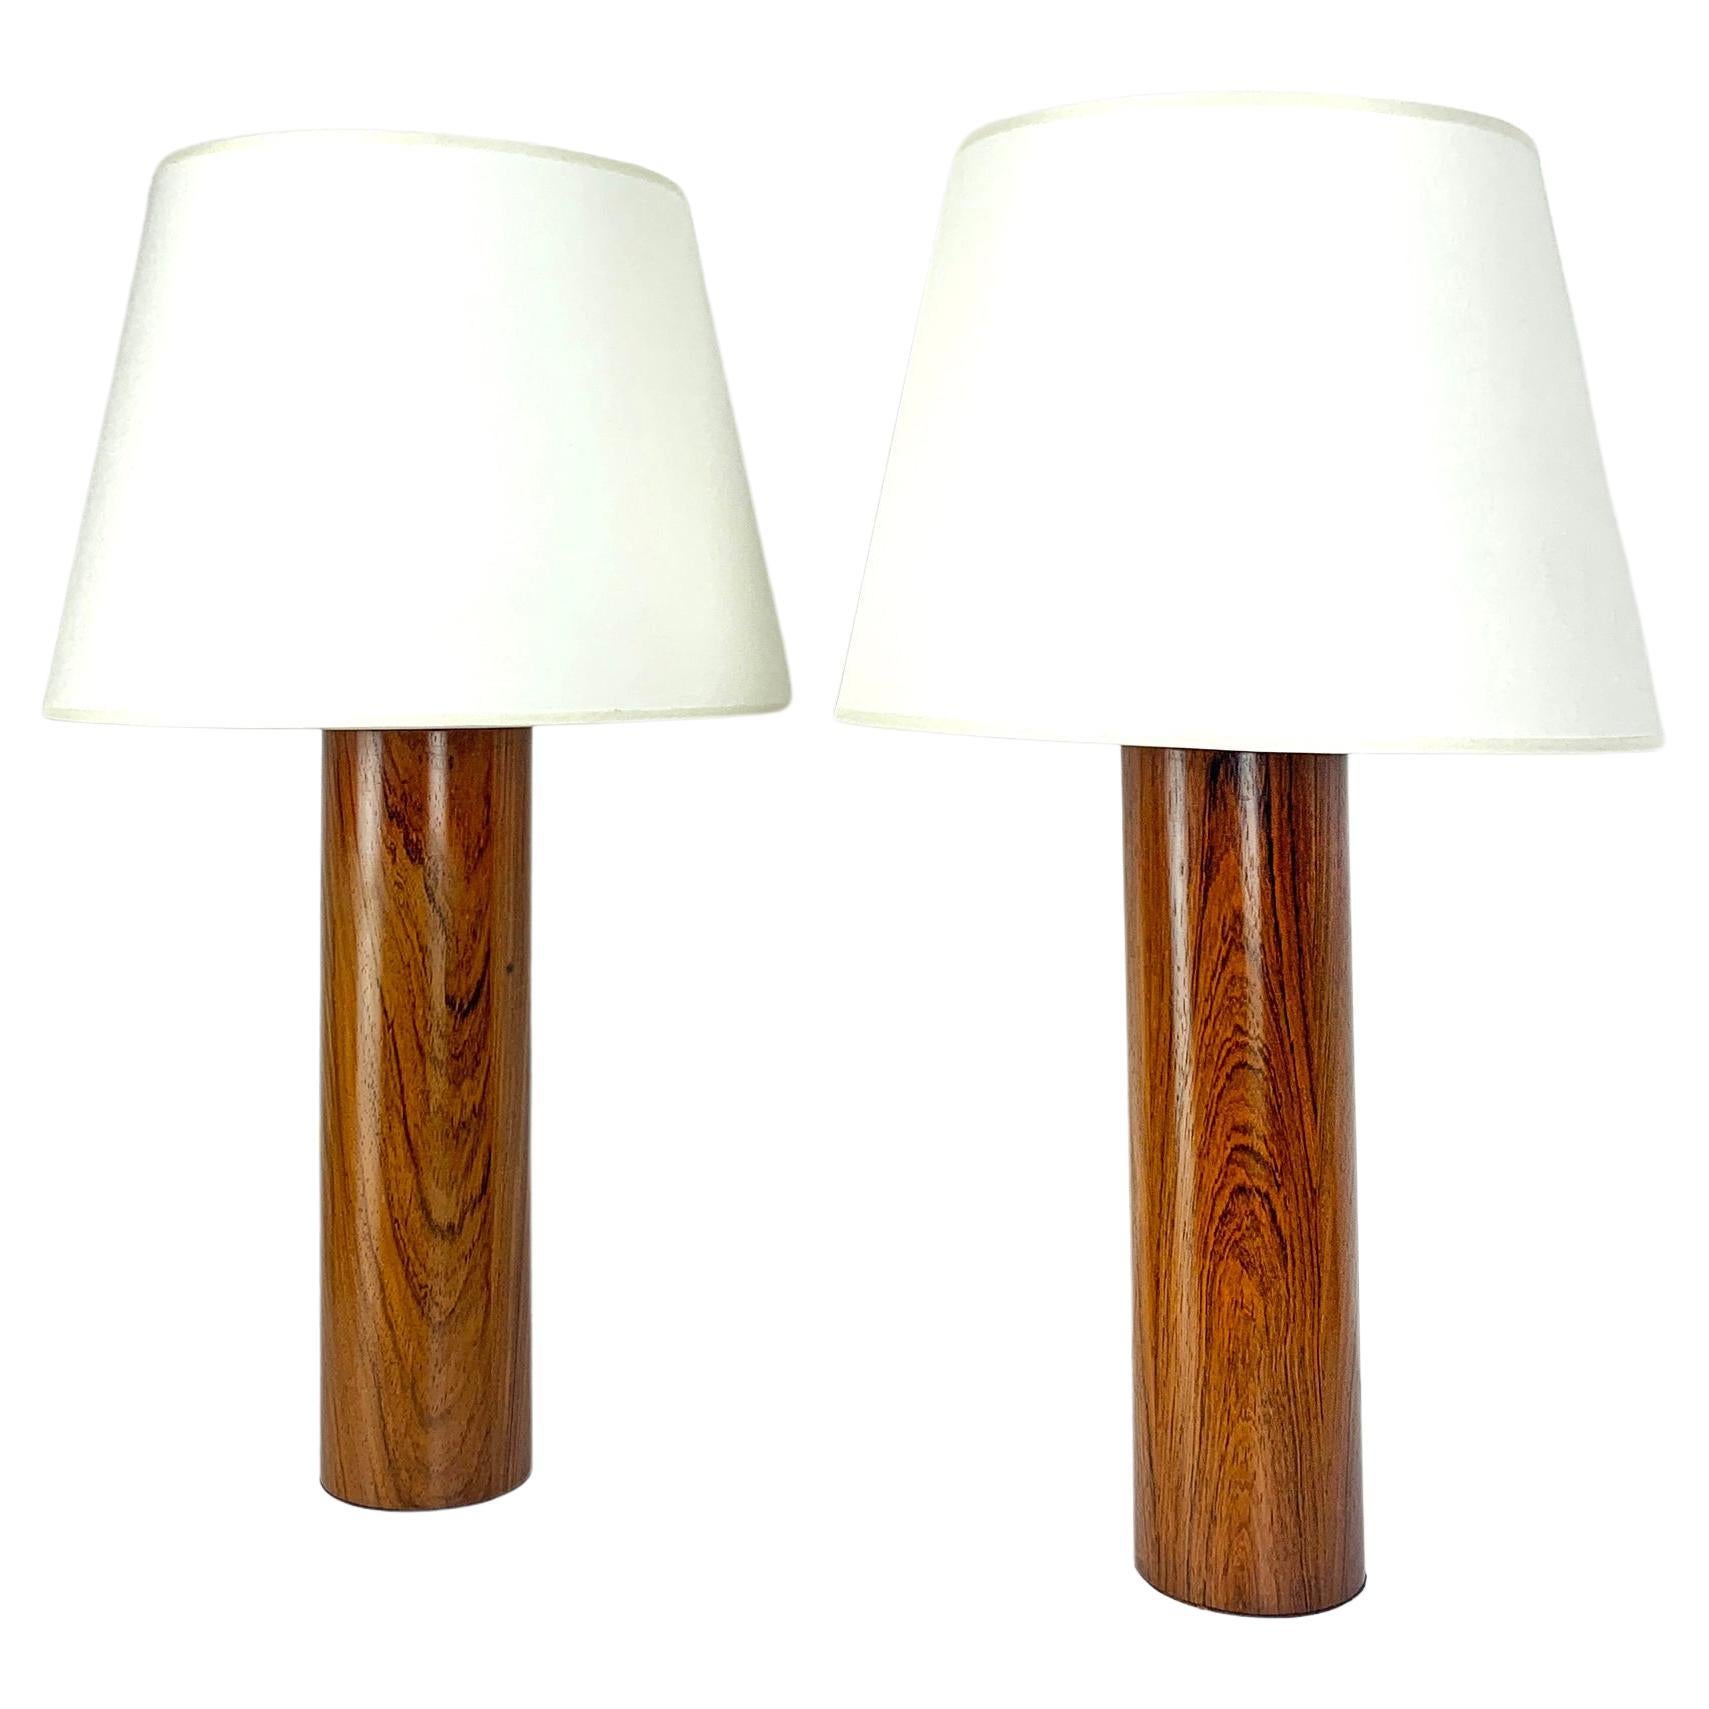 A pair of architectural table lamps. Lamp foots in wood, probably teak. 

Designed by Uno Kristiansson, for Luxus, Sweden, 1970s. Both retain their original labels: made in Sweden - Luxus Vittsjö - Design Uno & Östen Kristiansson.

For E26/27 bulbs.